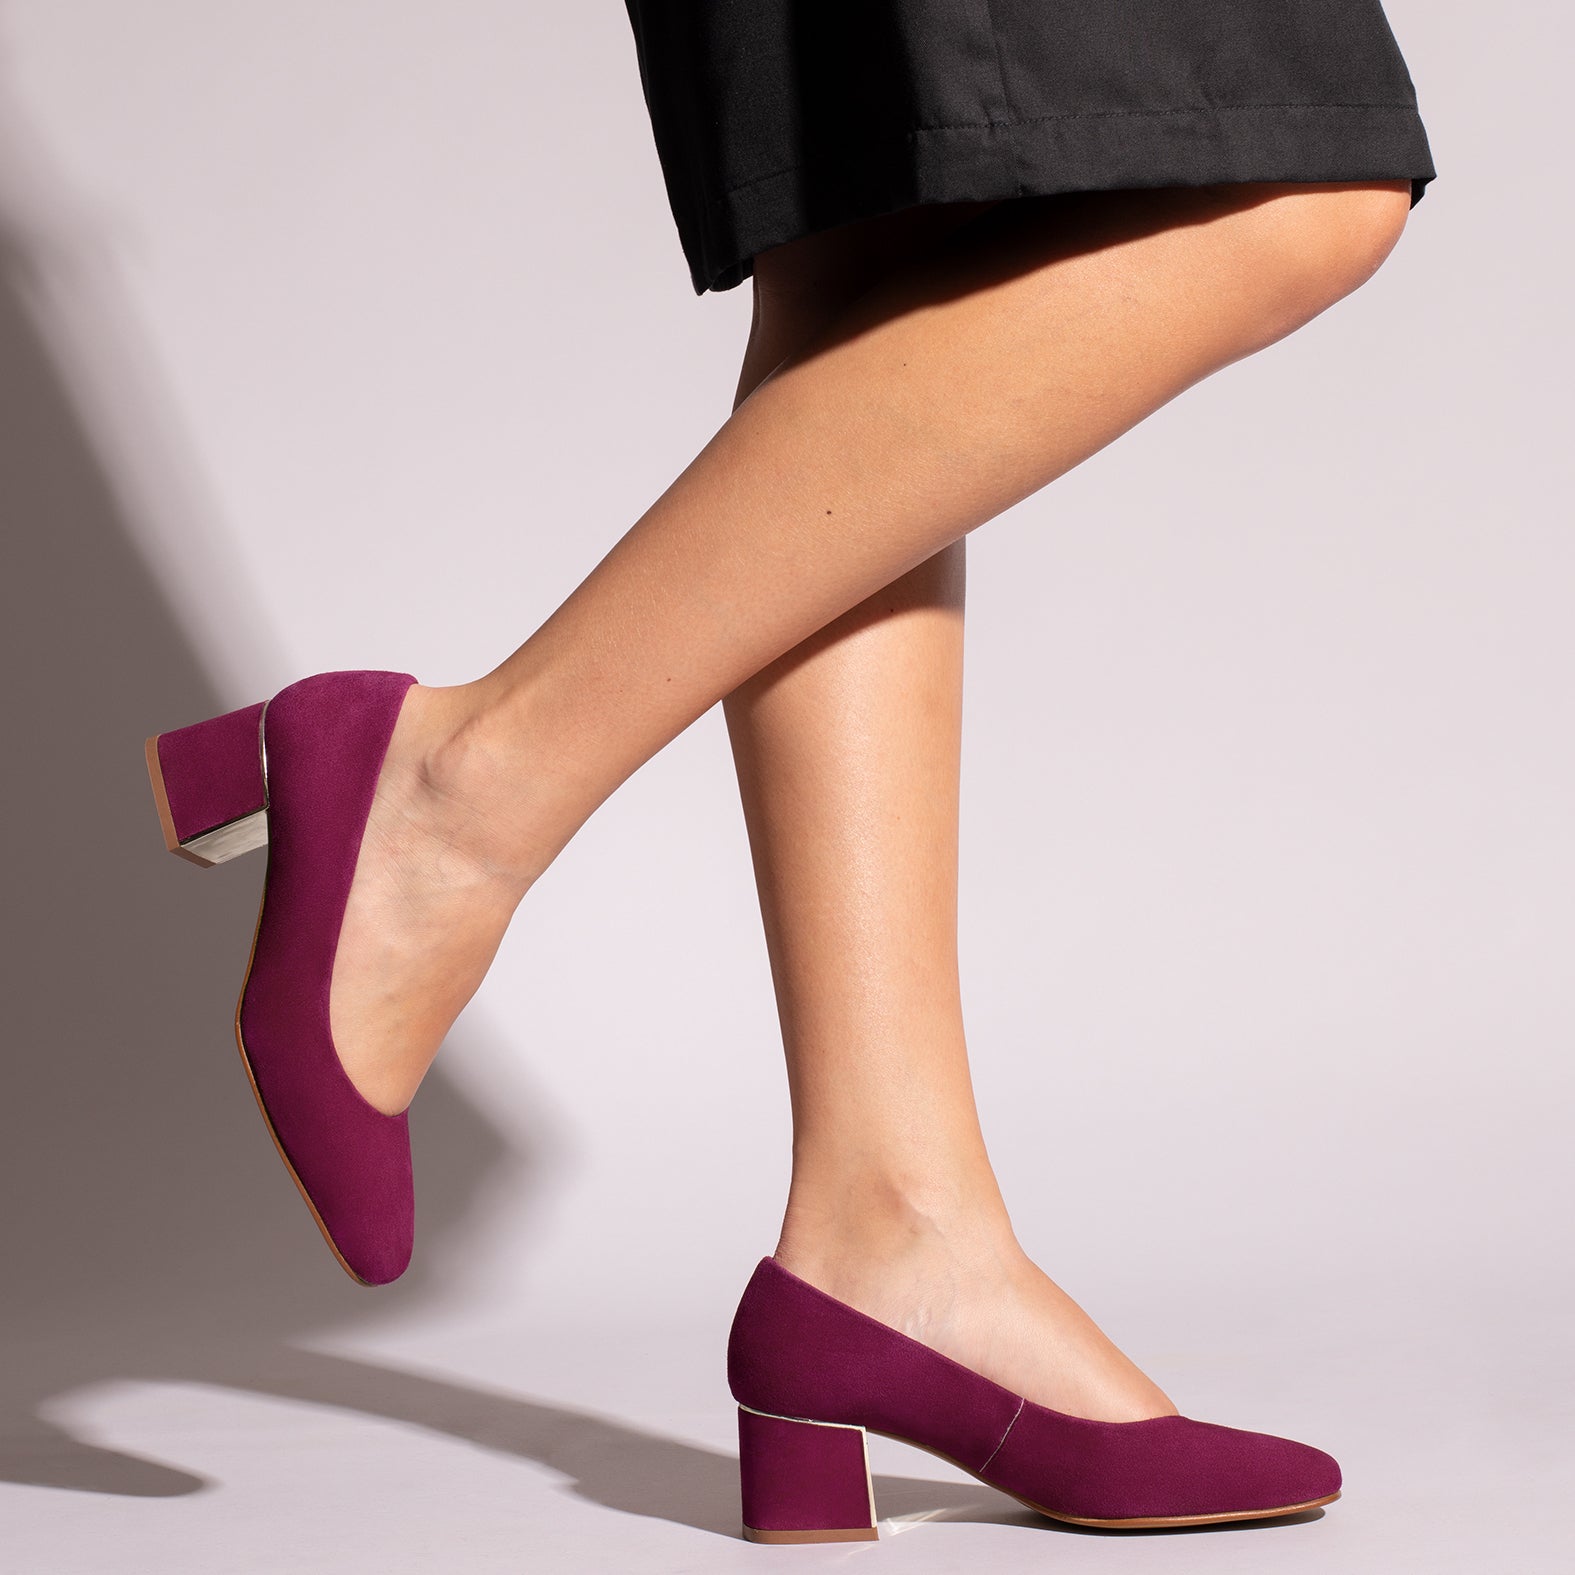 FEMME – WINE mid heeled shoes with square toe